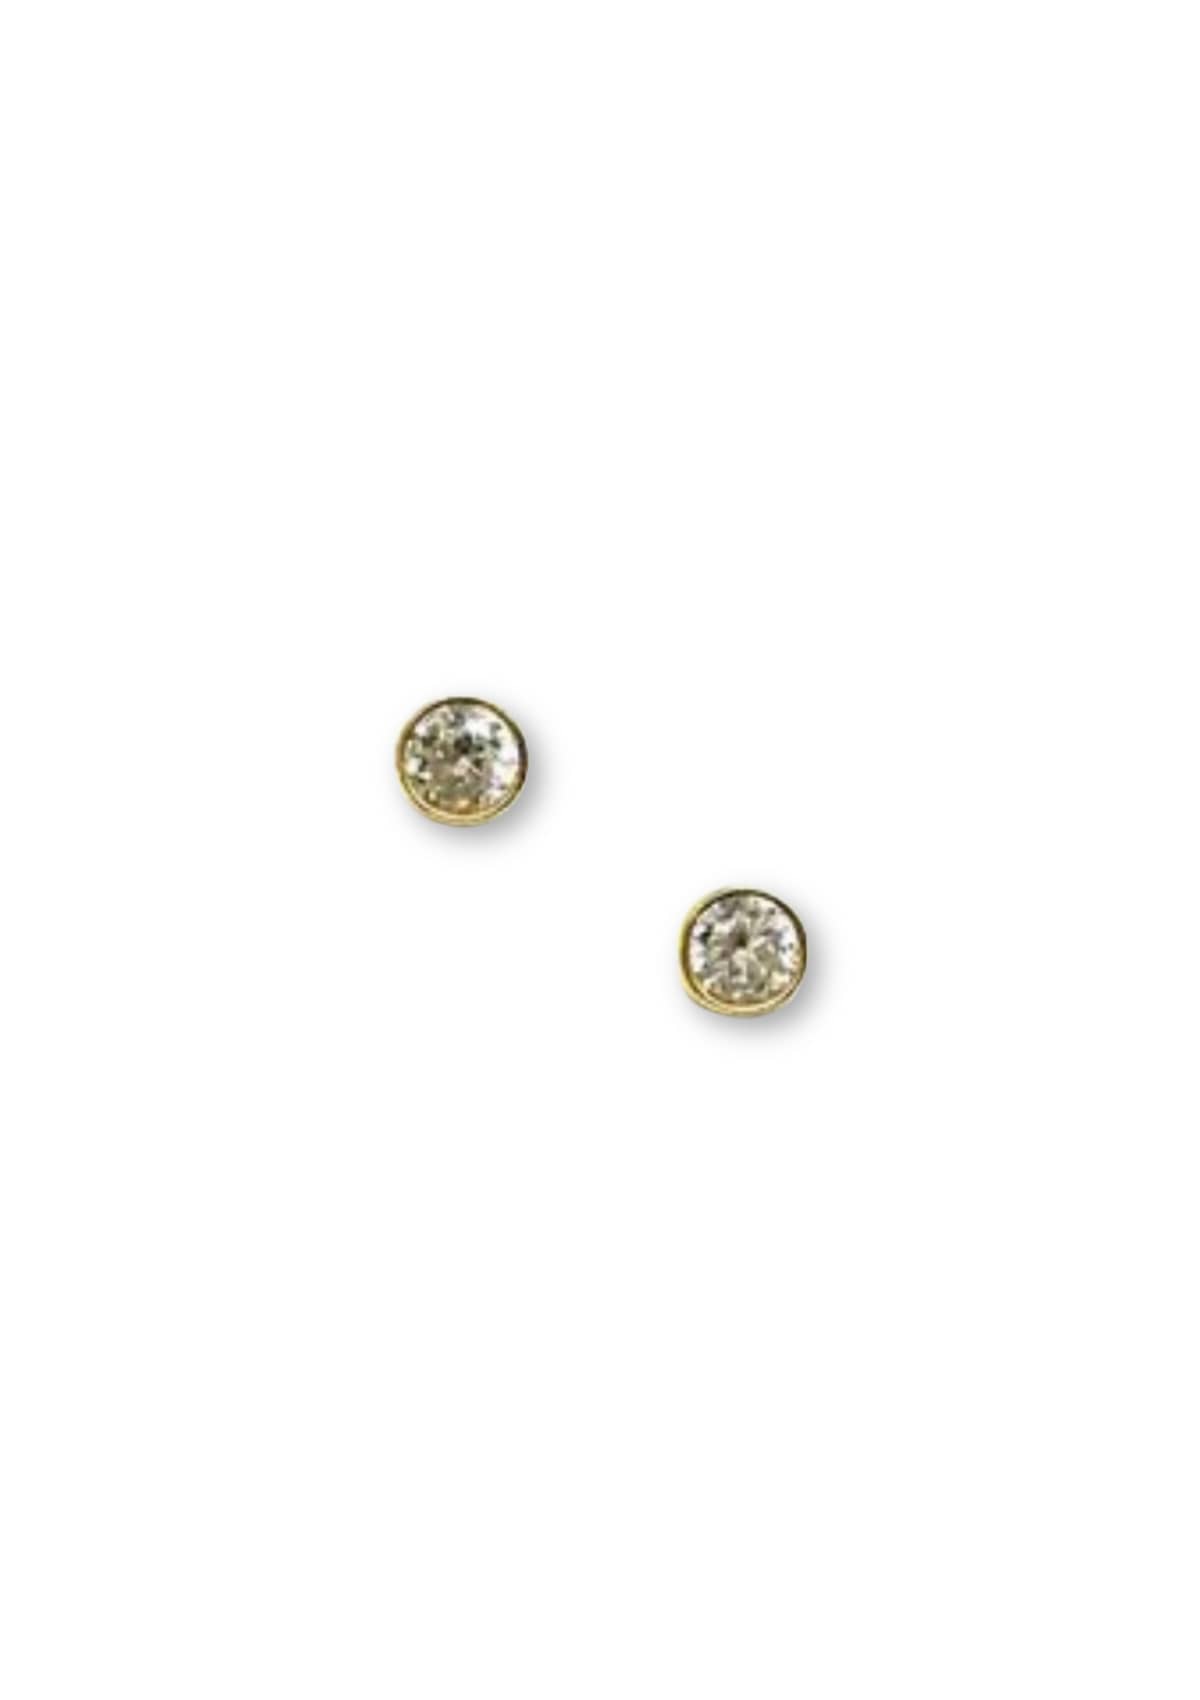 Round small stud earrings.